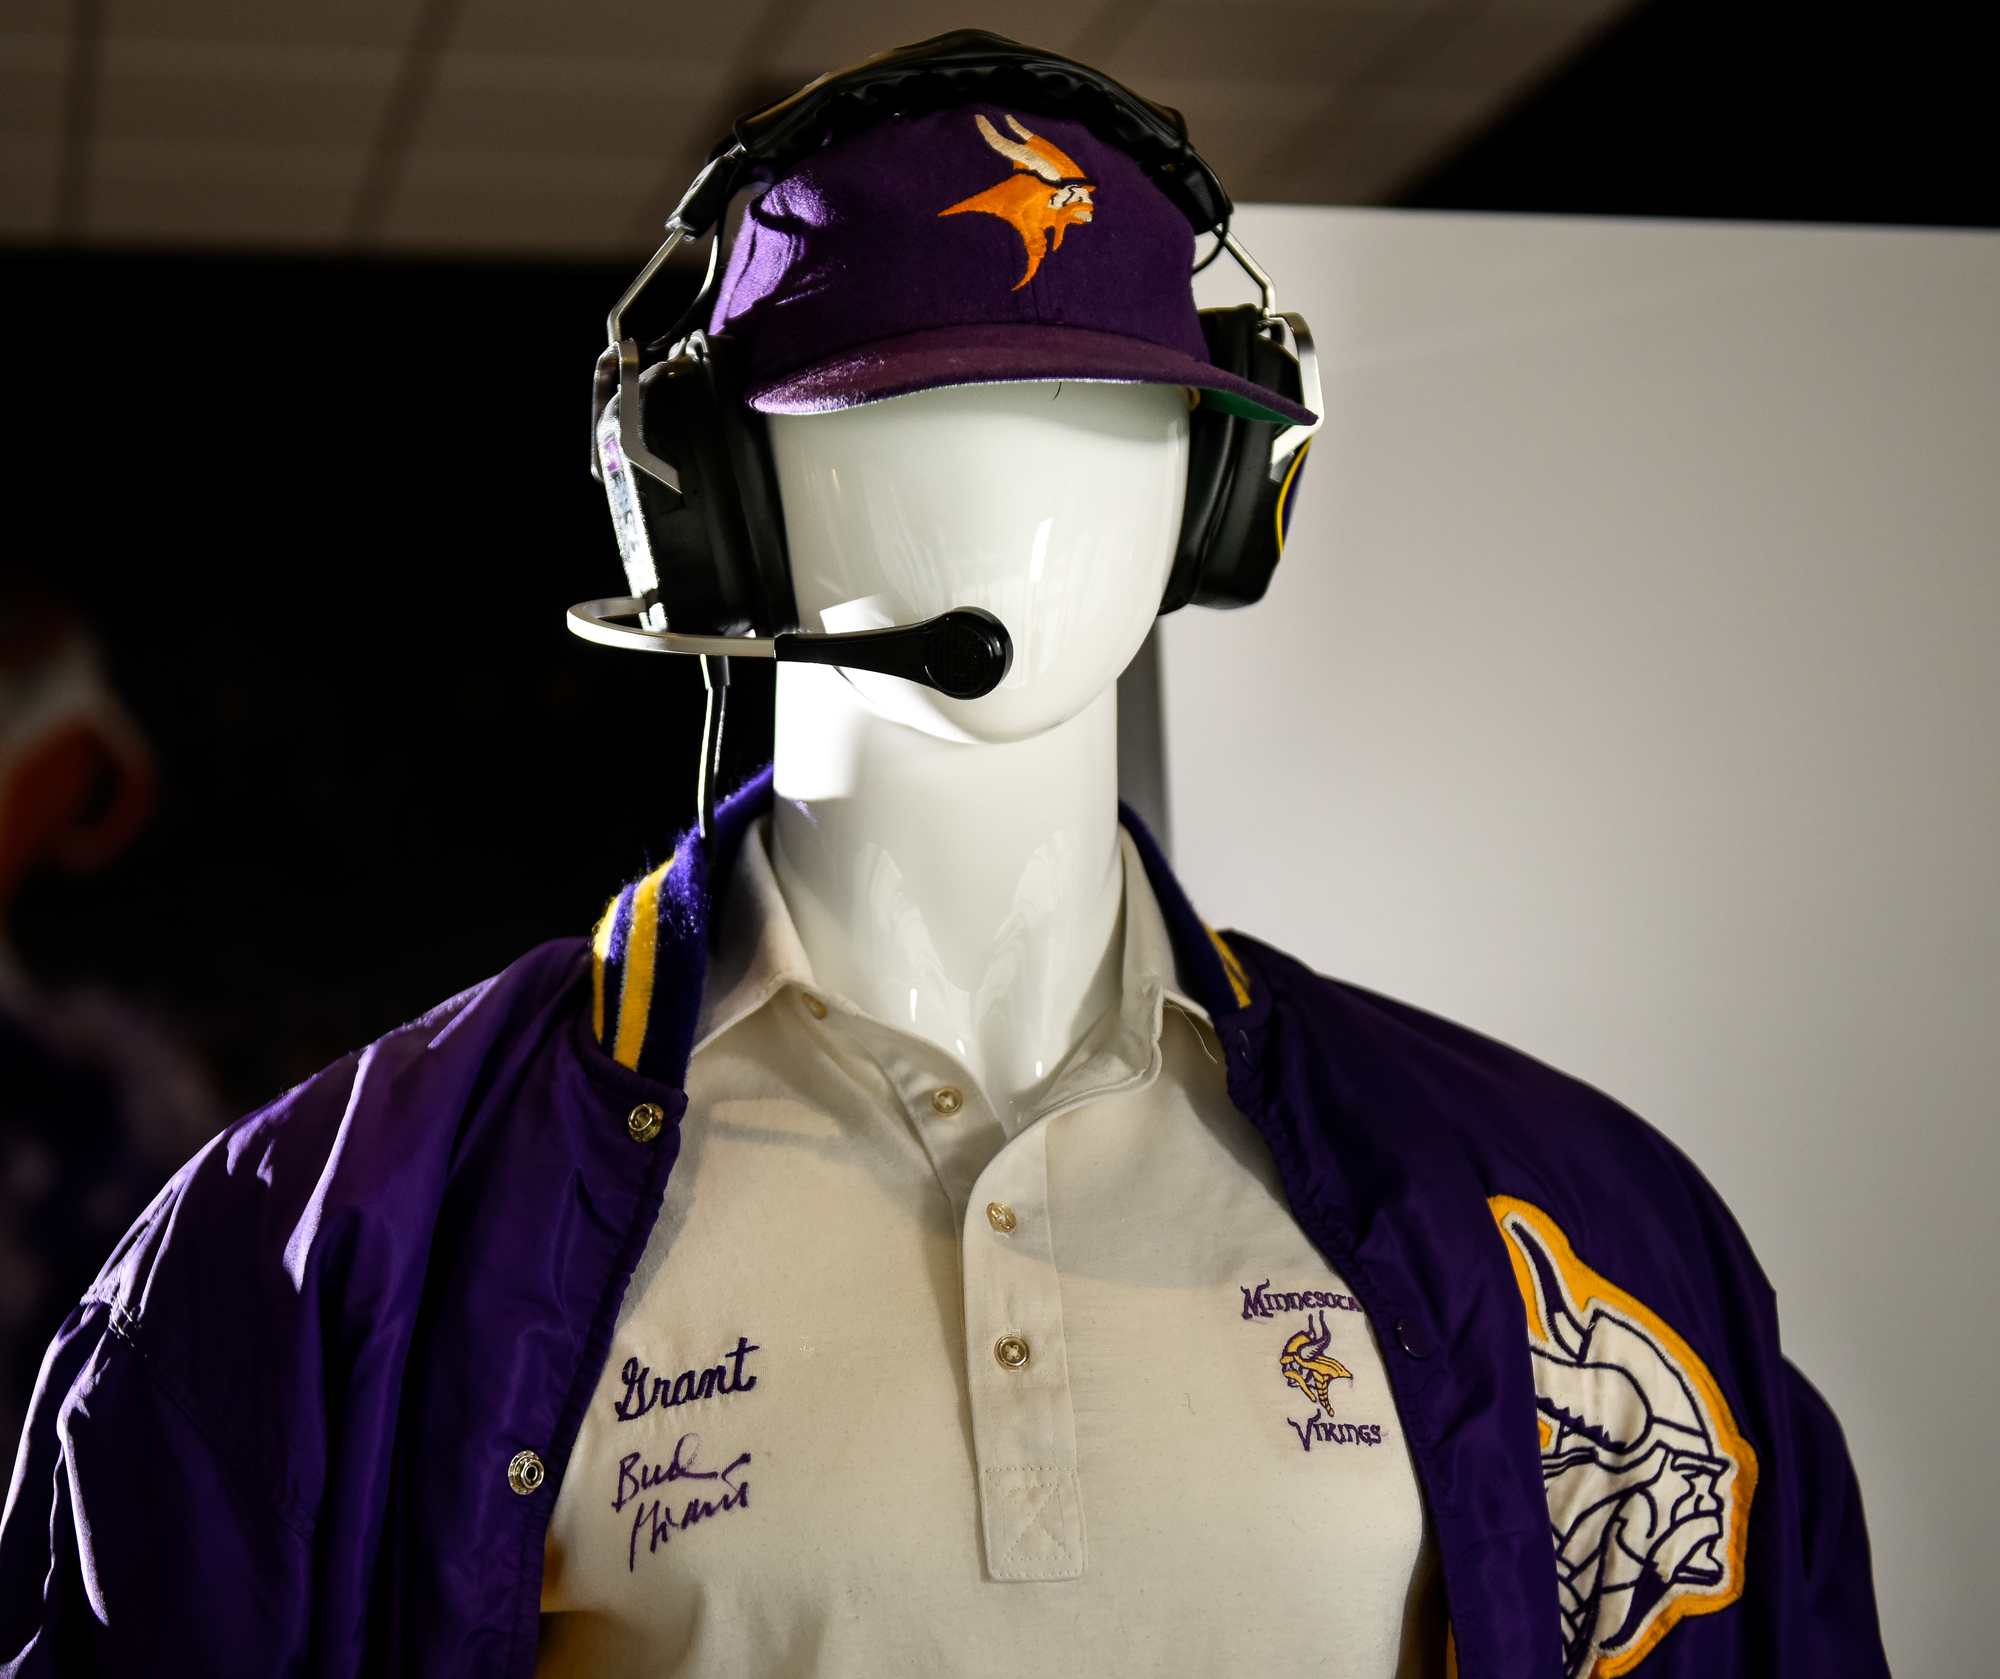 Some of Bud Grant’s official gear on display at the Vikings Museum.